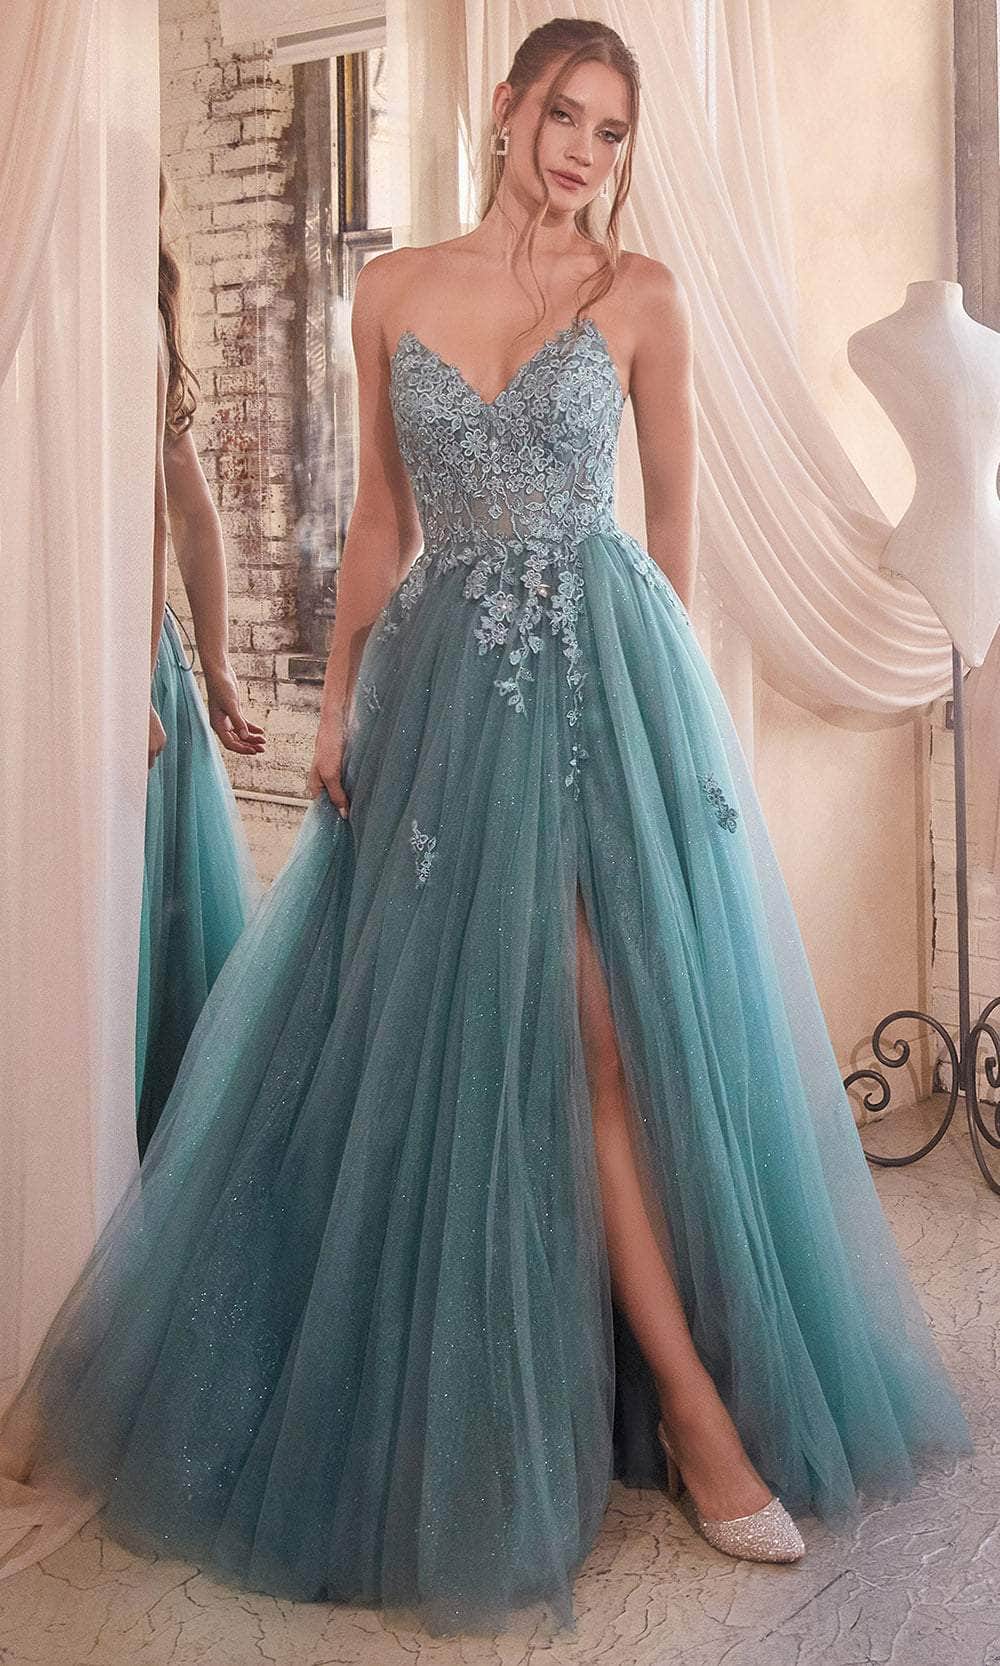 Ladivine C148 - Sweetheart Lace Up Prom Dress
